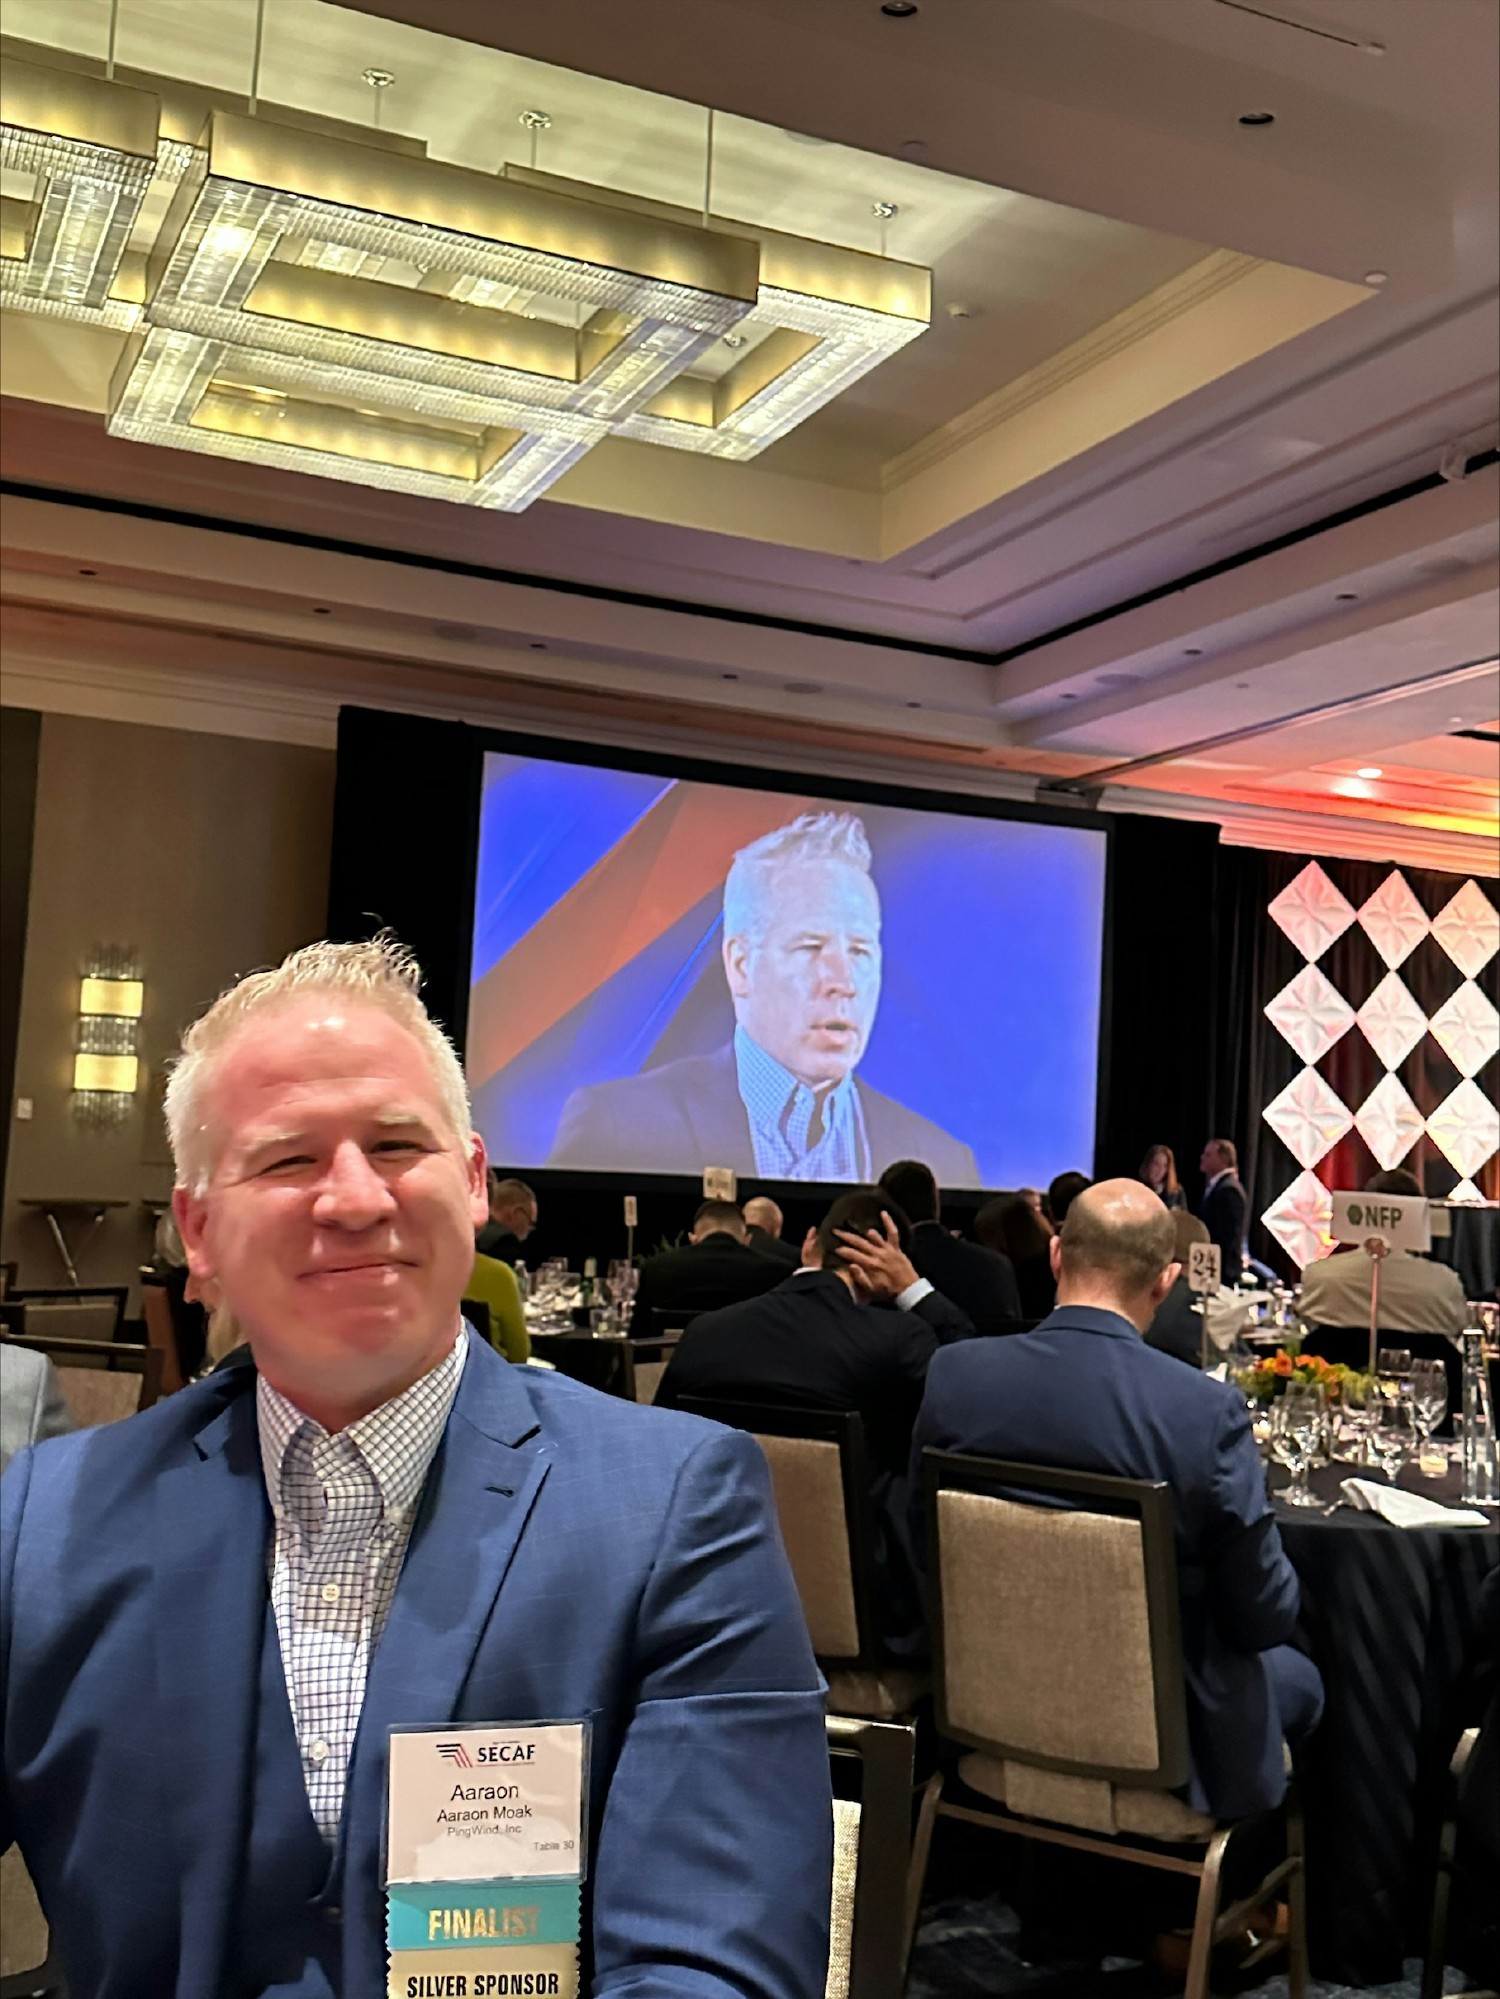 Aaron Moak, CEO, at the annual SECAF Government Contractor Awards event.